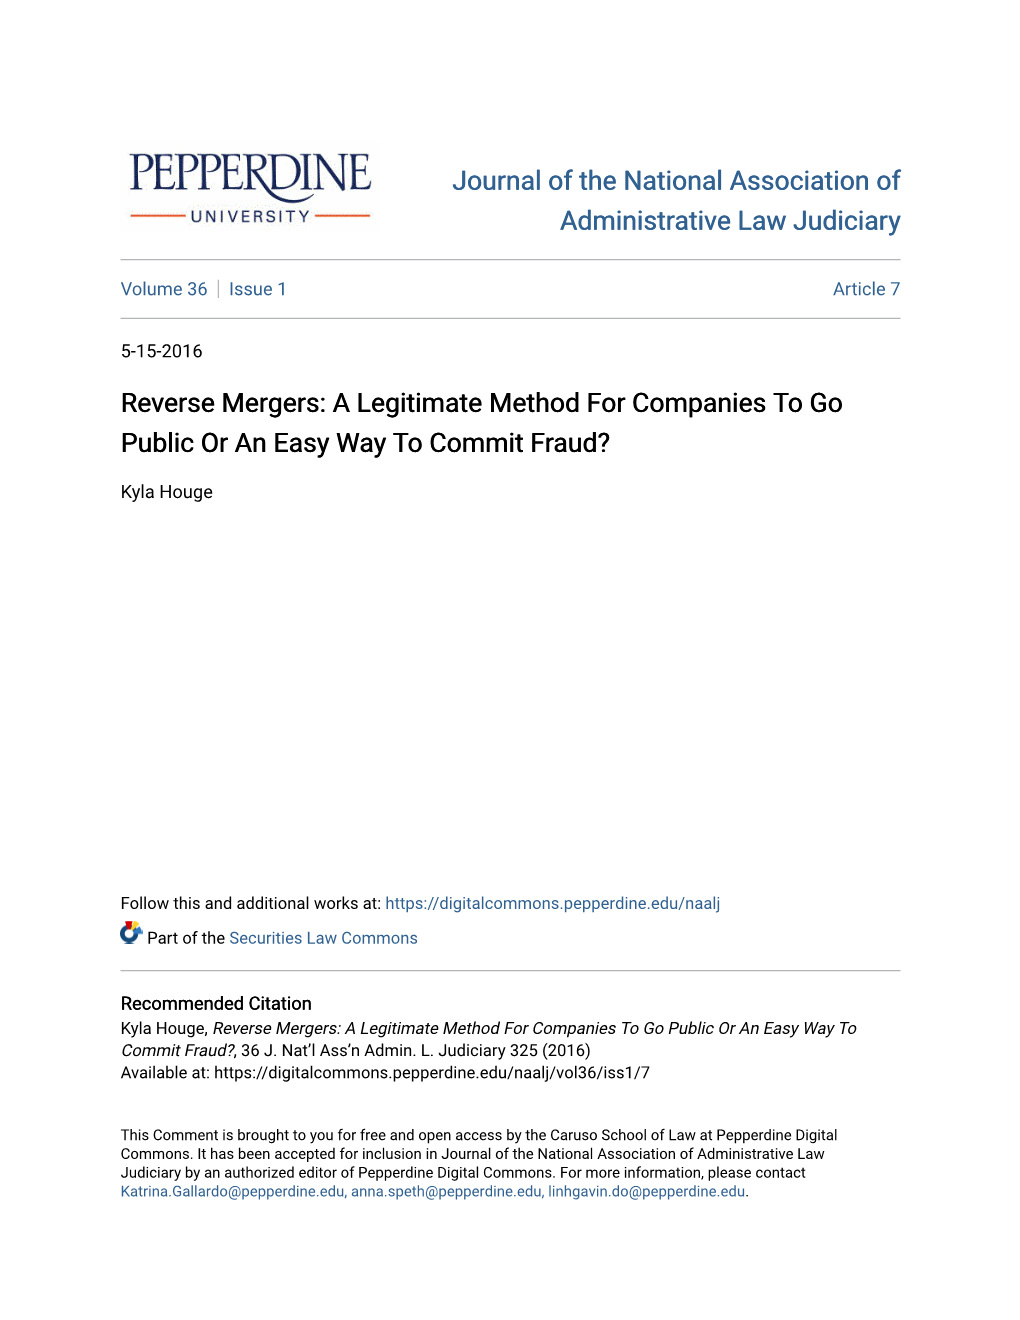 Reverse Mergers: a Legitimate Method for Companies to Go Public Or an Easy Way to Commit Fraud?